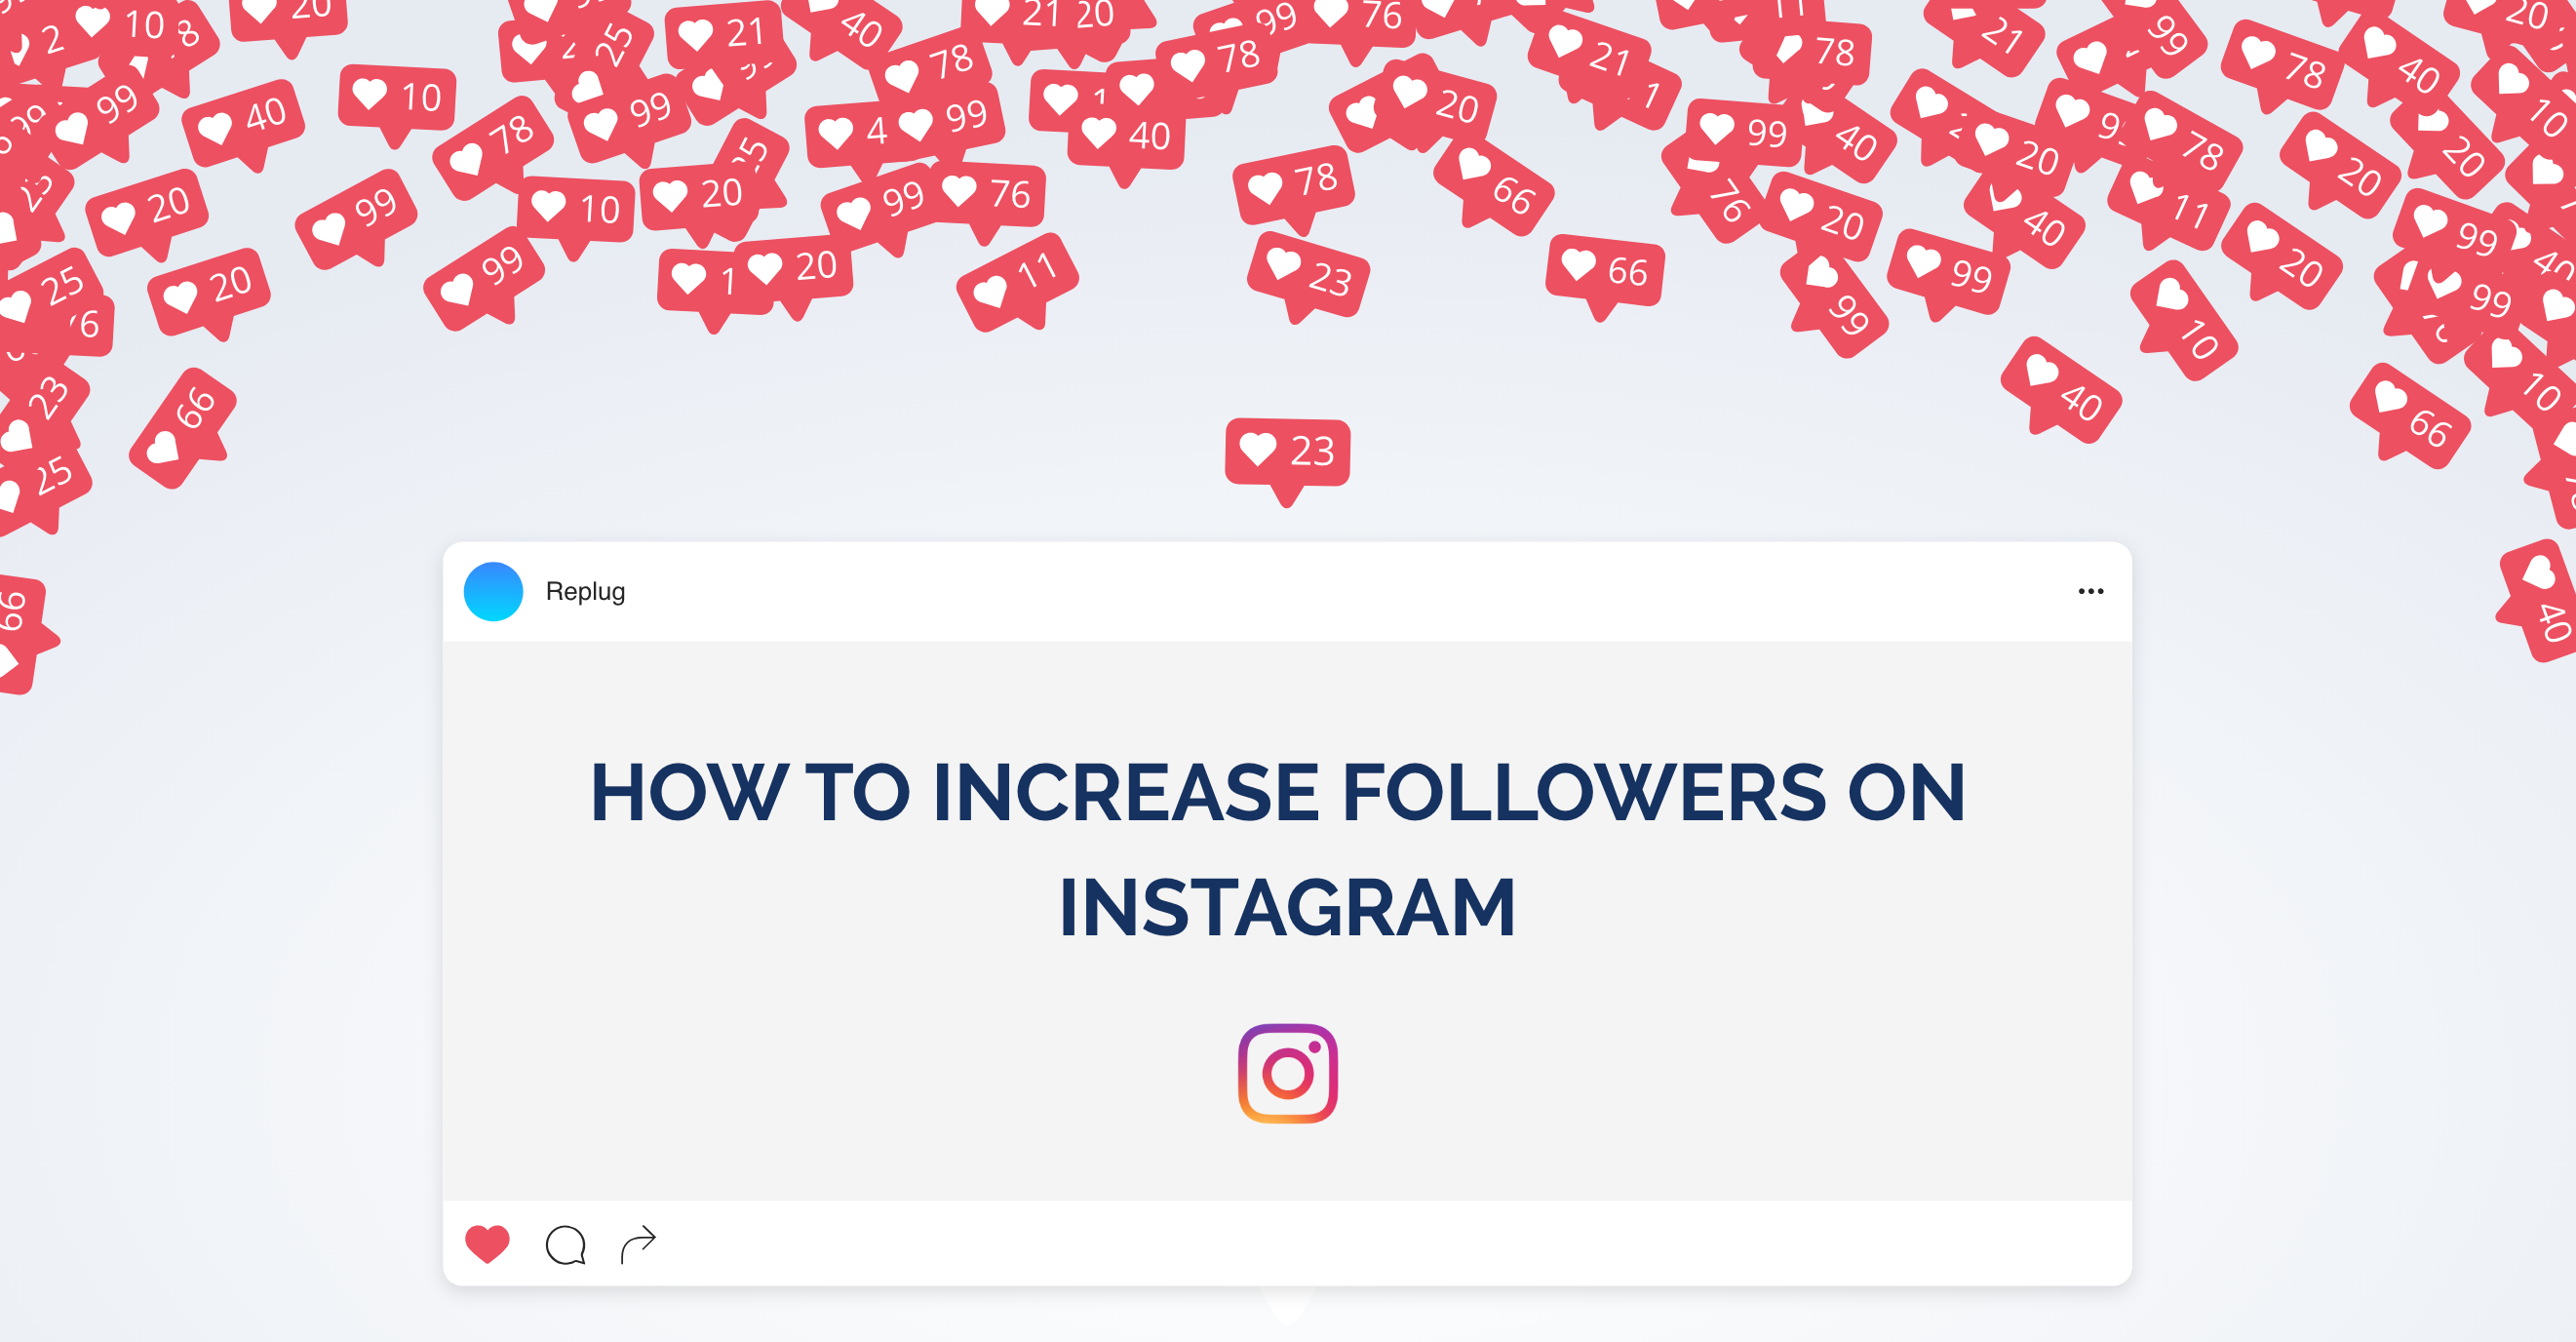 How to Increase Followers on Instagram: Share Custom links